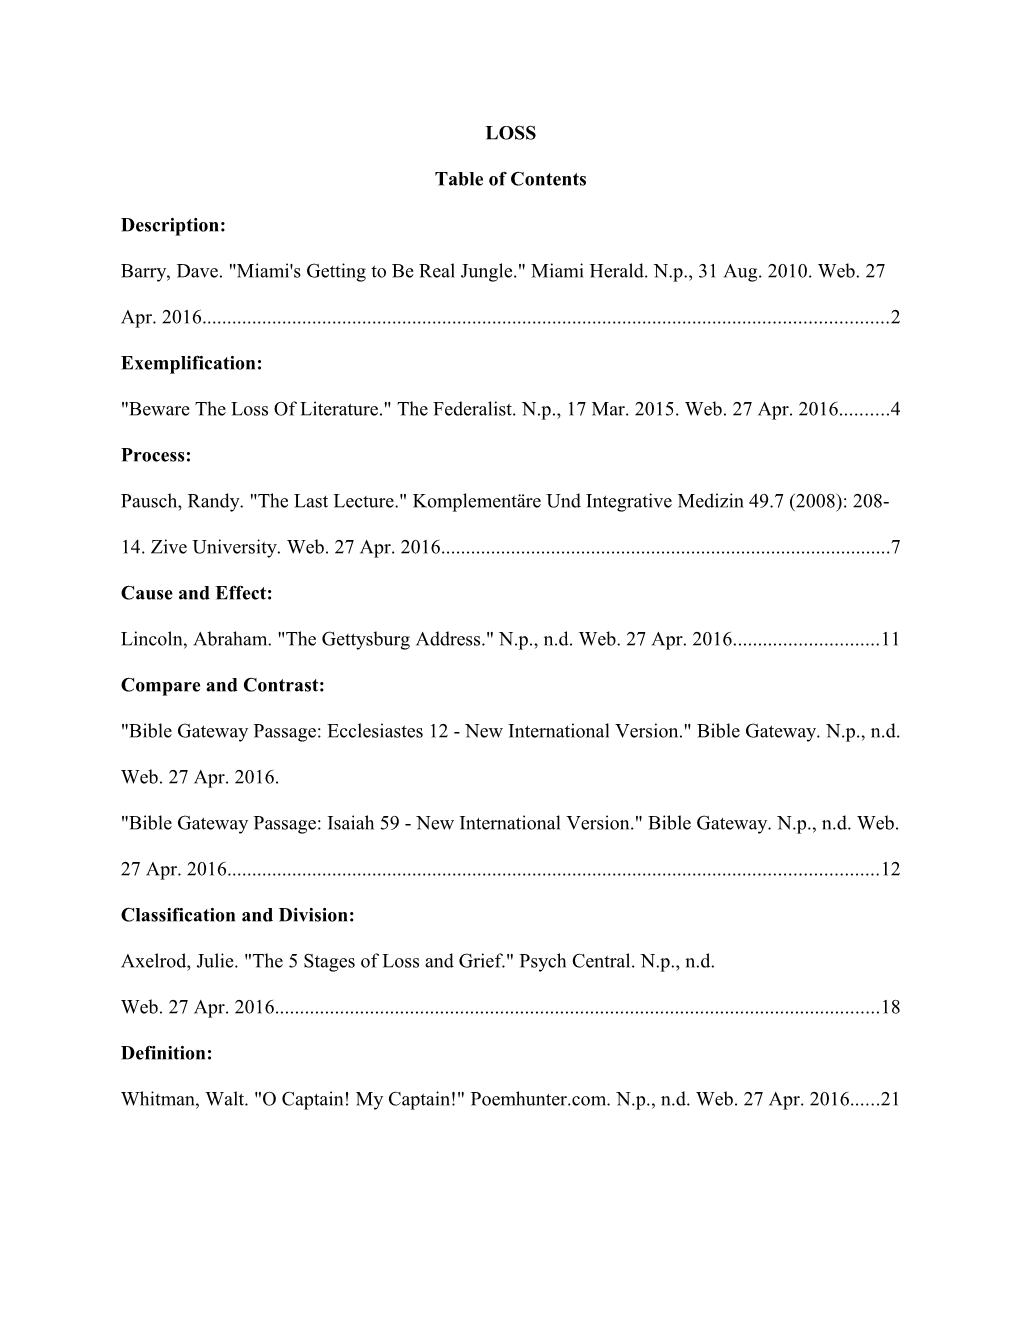 Table of Contents s260